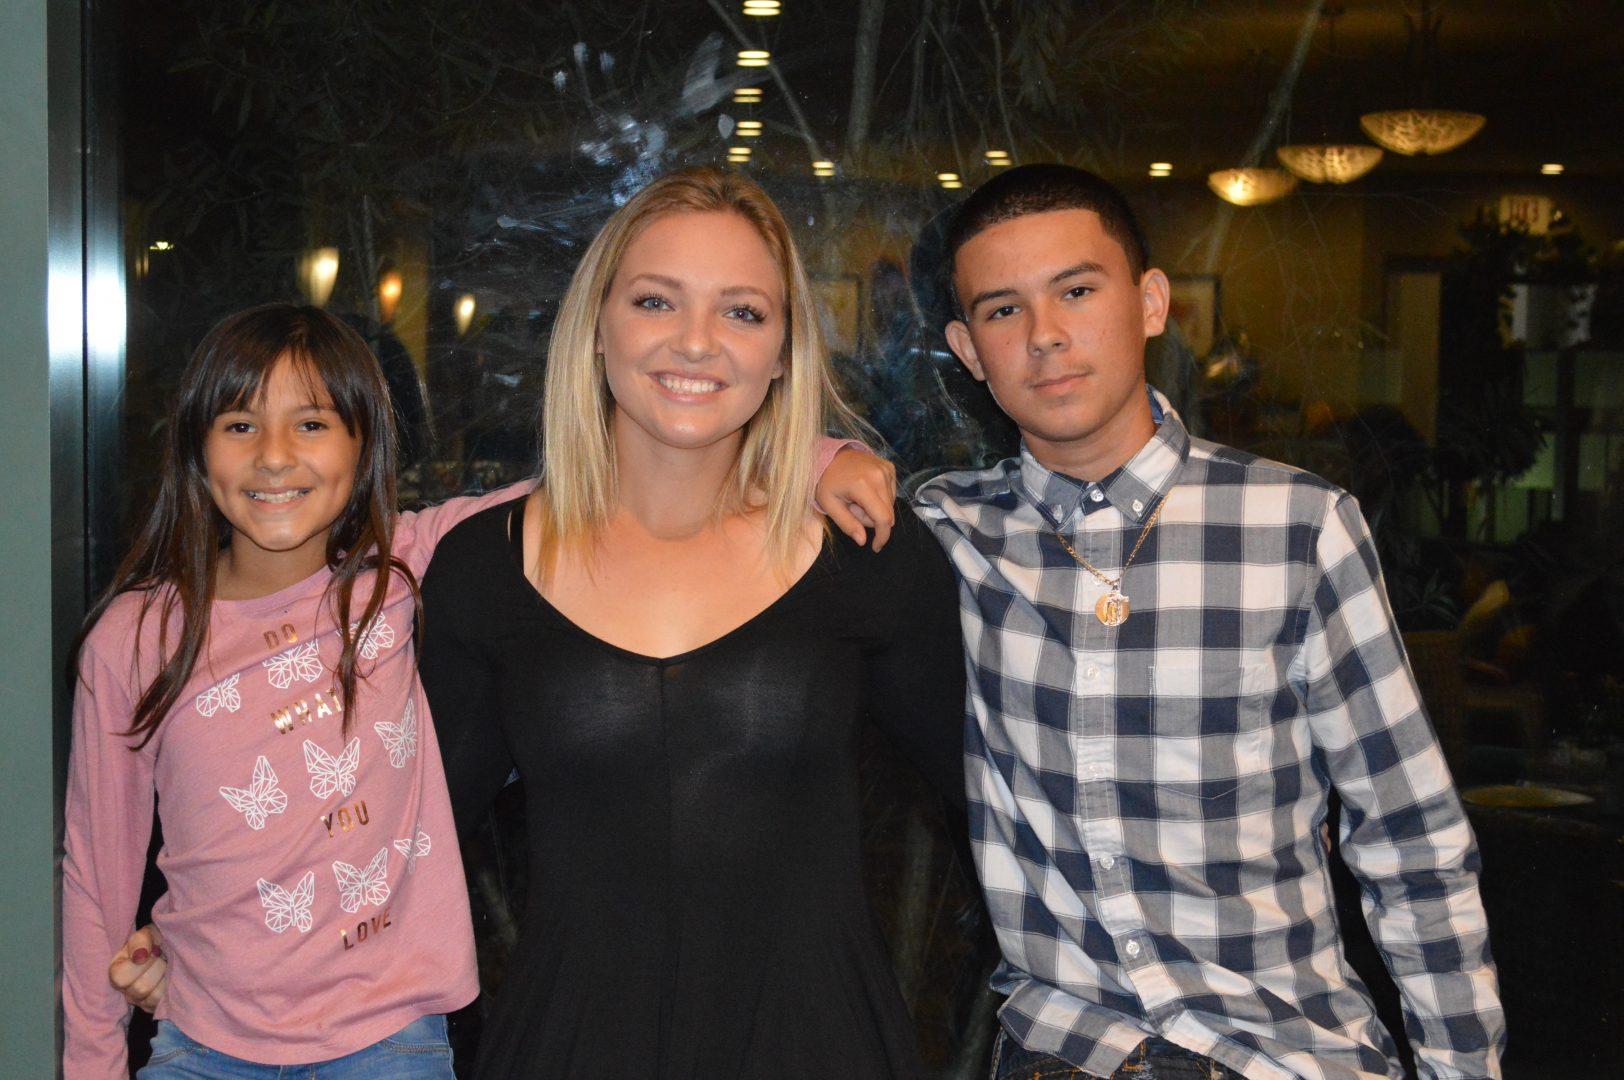 Fresno State womens soccer star Robyn McCarthy poses for a family dinner with Eliana VillaseÃ±or (left) and Jorge VillaseÃ±or Jr.